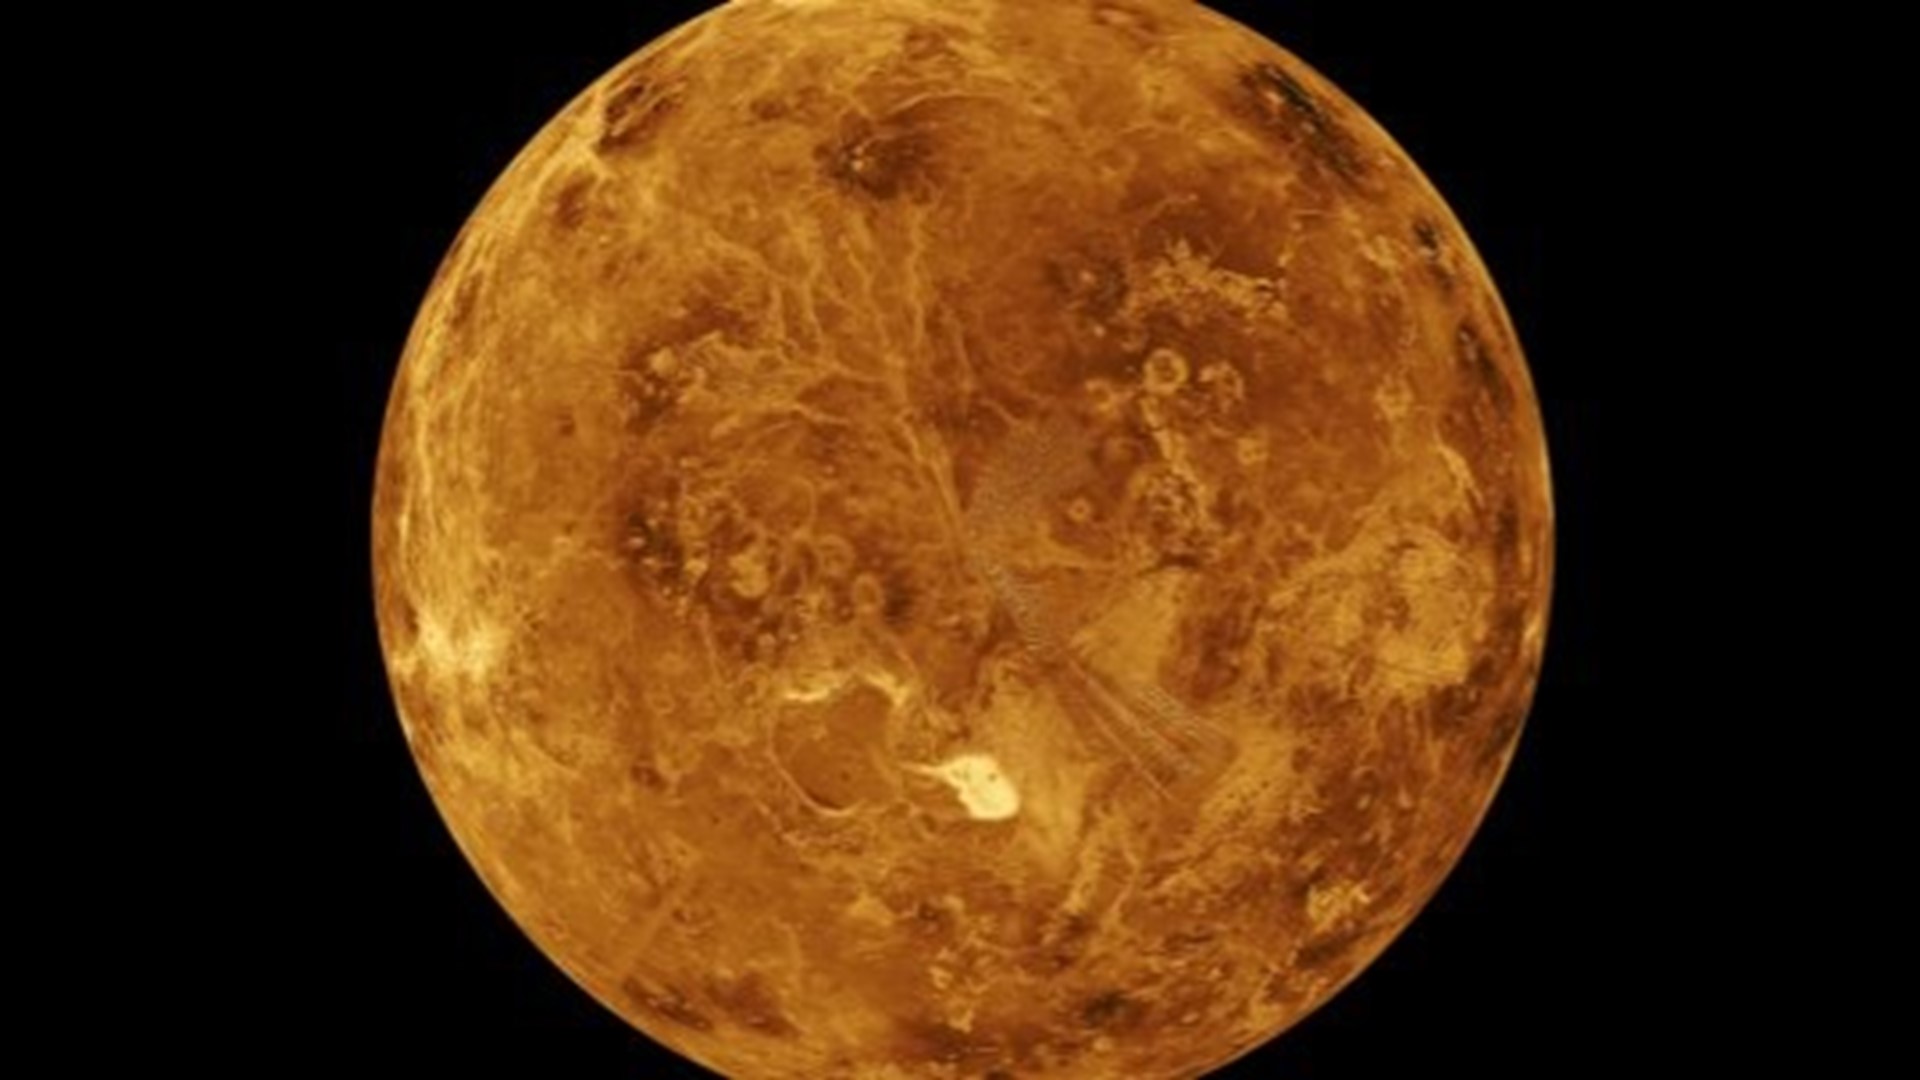 Venus was considered a mostly inactive planet, but a new discovery suggests there are dozens of active volcanoes on the planet's surface that researchers say may be dormant, but they aren't dead.